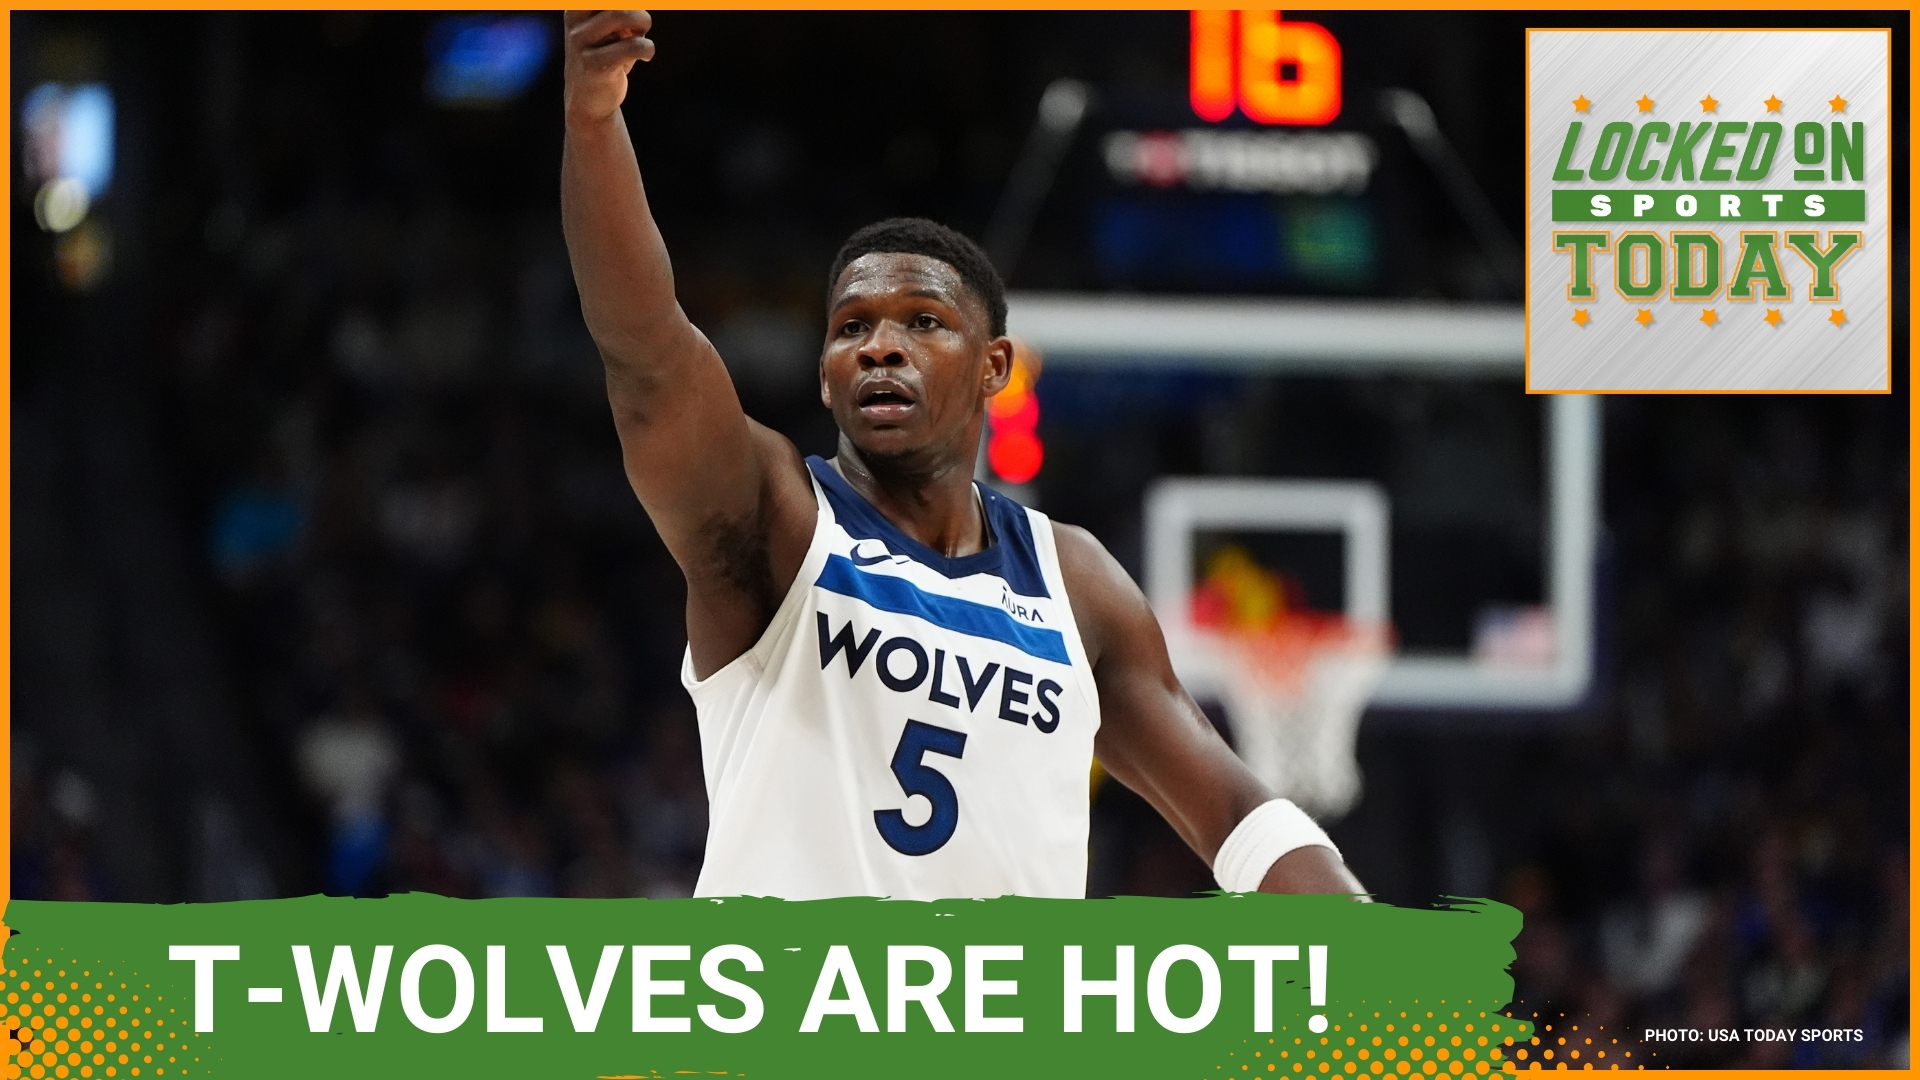 Anthony Edwards and the Minnesota Timberwolves iced the Denver Nuggets in Game One in the second round of the NBA Playoffs, and more.